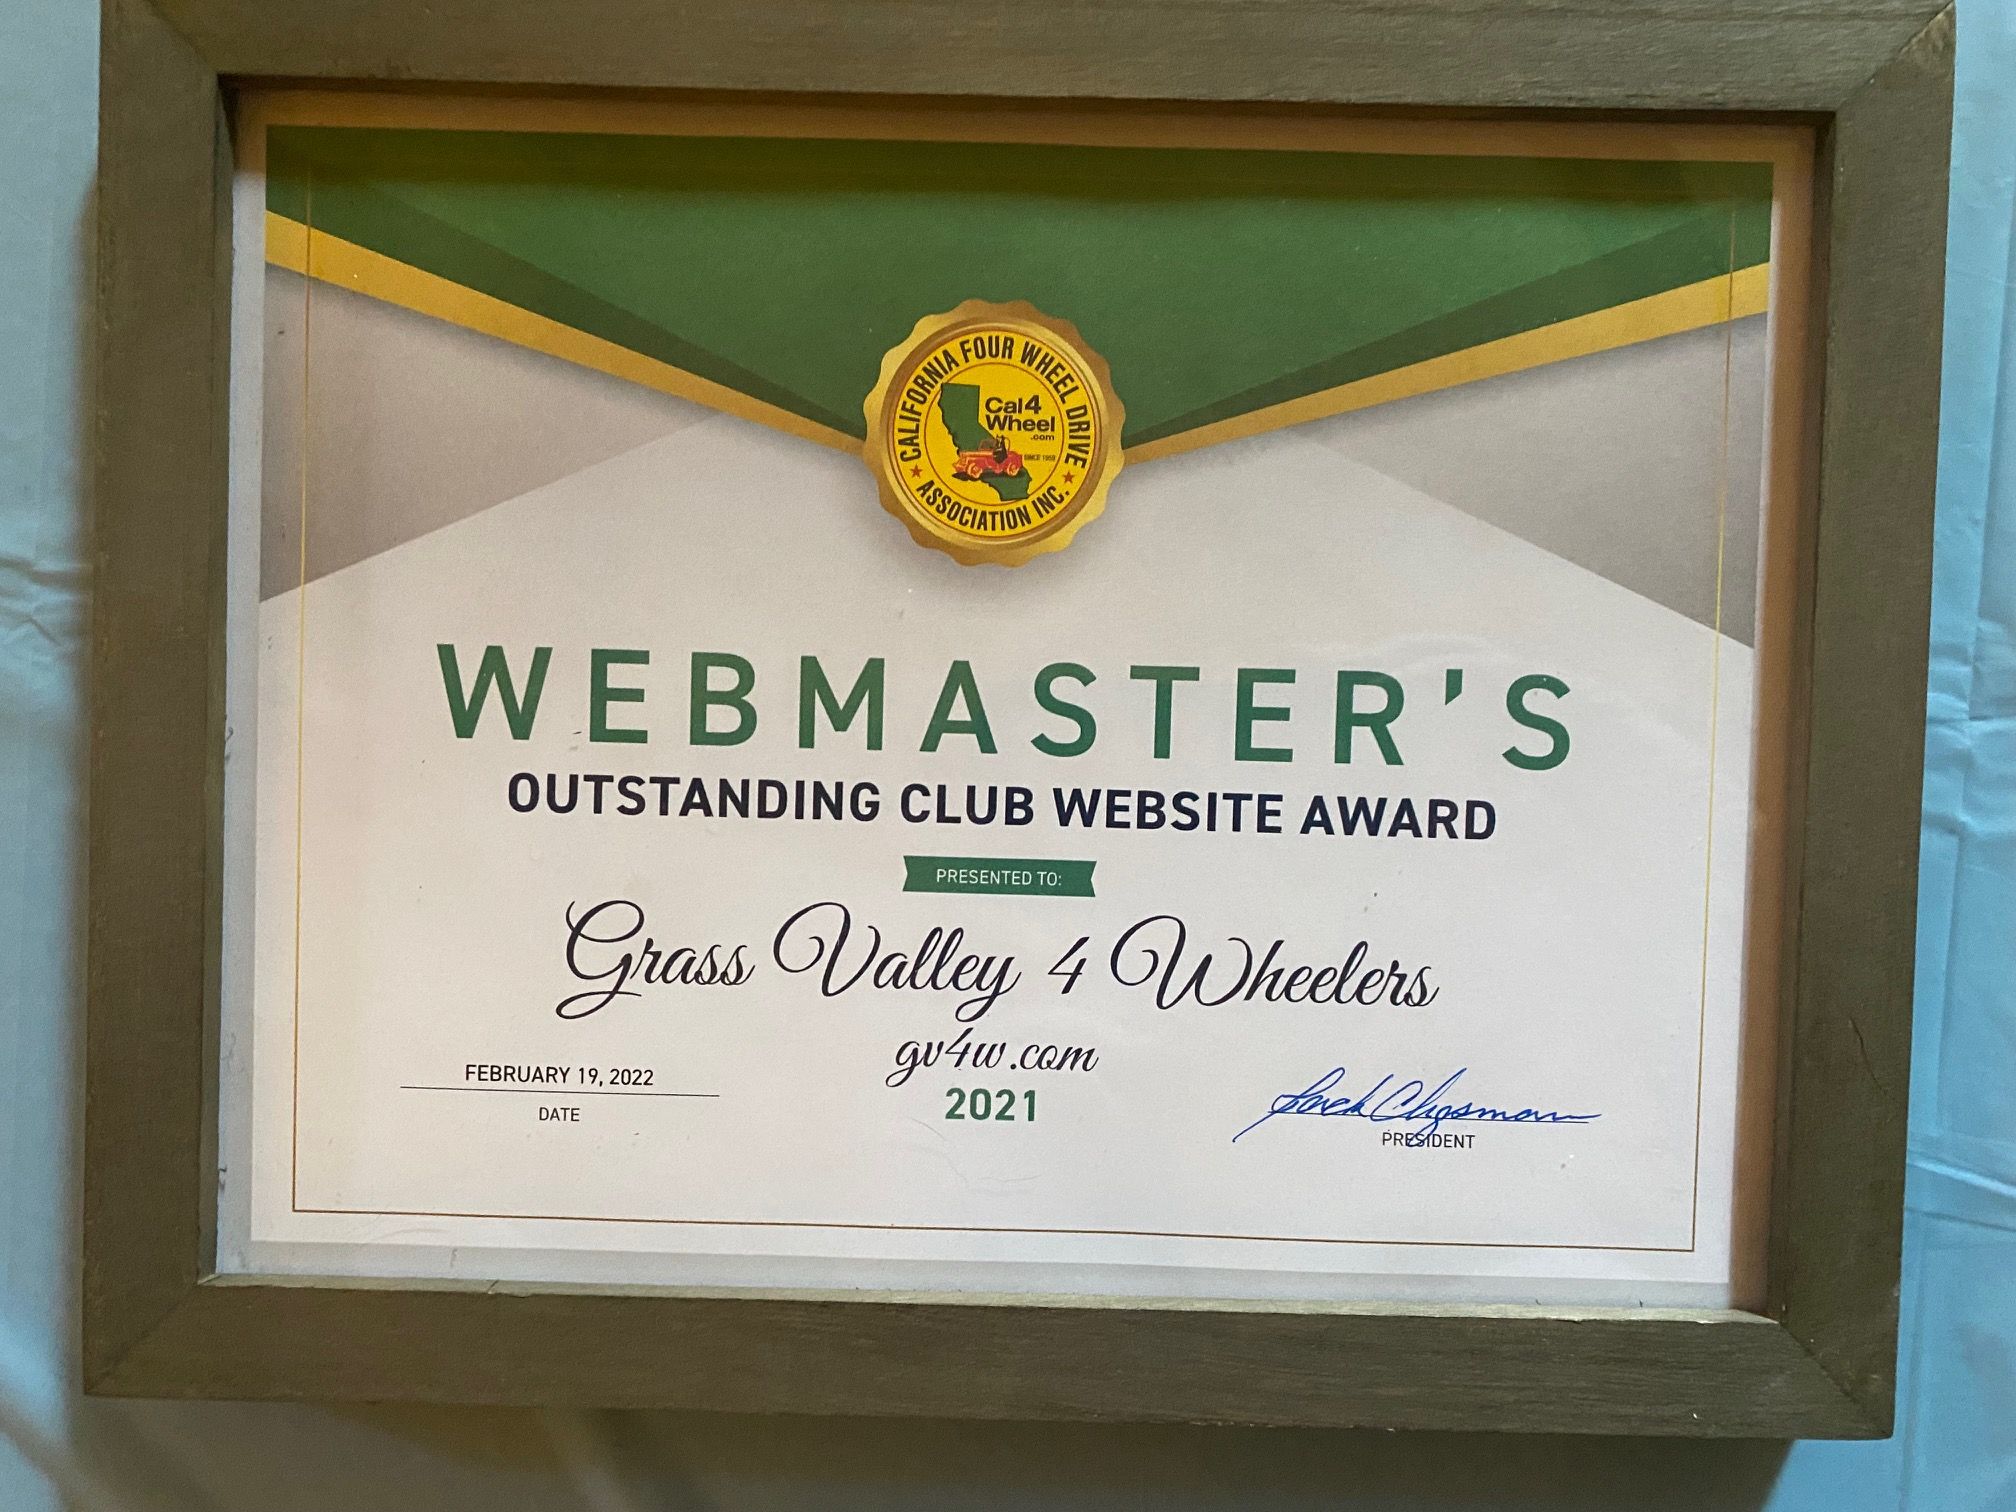 Webmaster's Outstanding Club Webpage Award